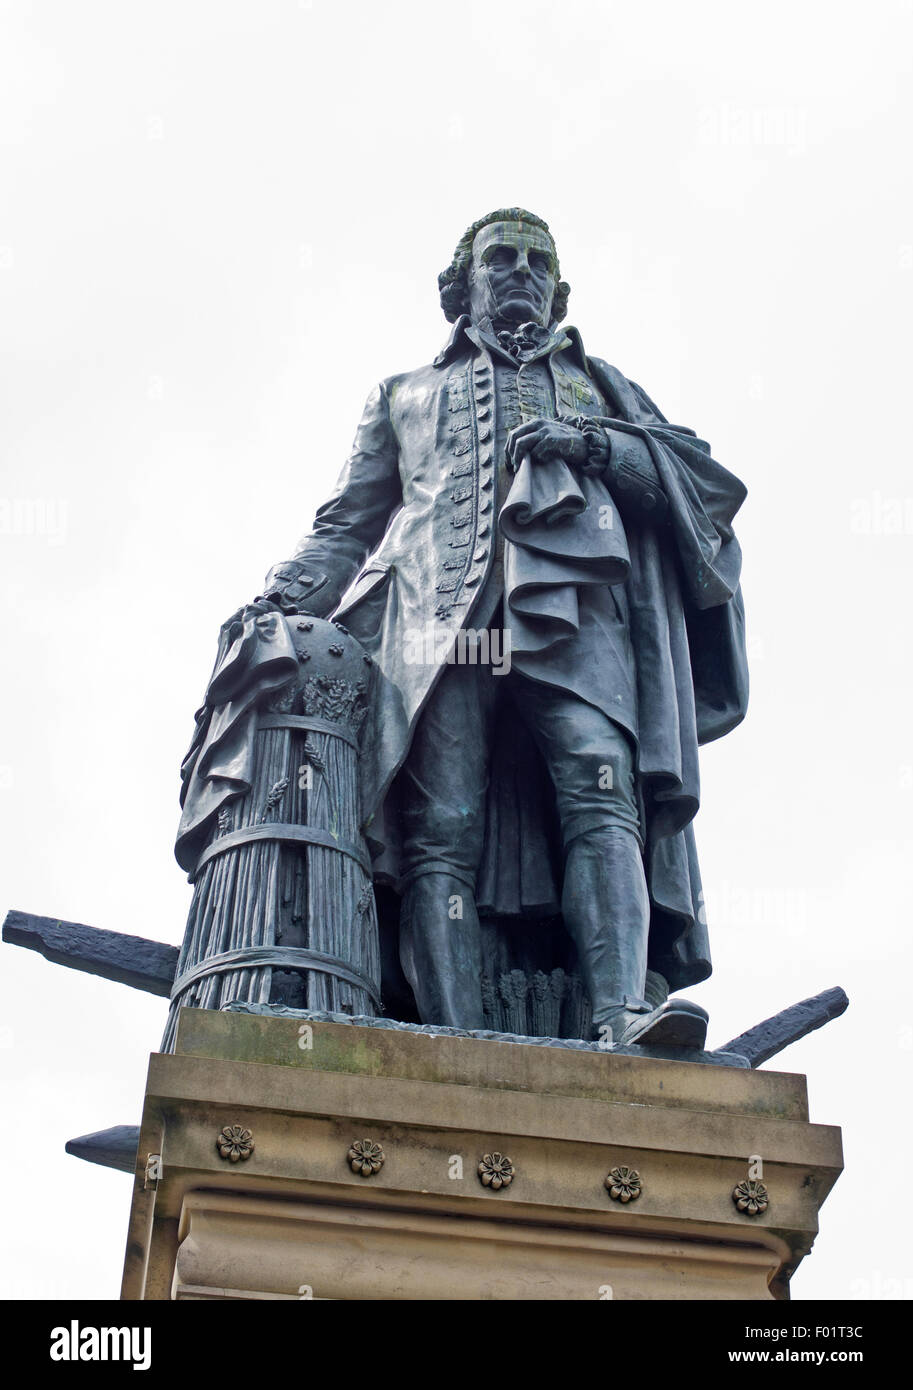 Bronze statue of Adam Smith, sculpted by Alexander Stoddart, on High Street on the Royal Mile, Edinburgh Old Town, Scotland UK Stock Photo